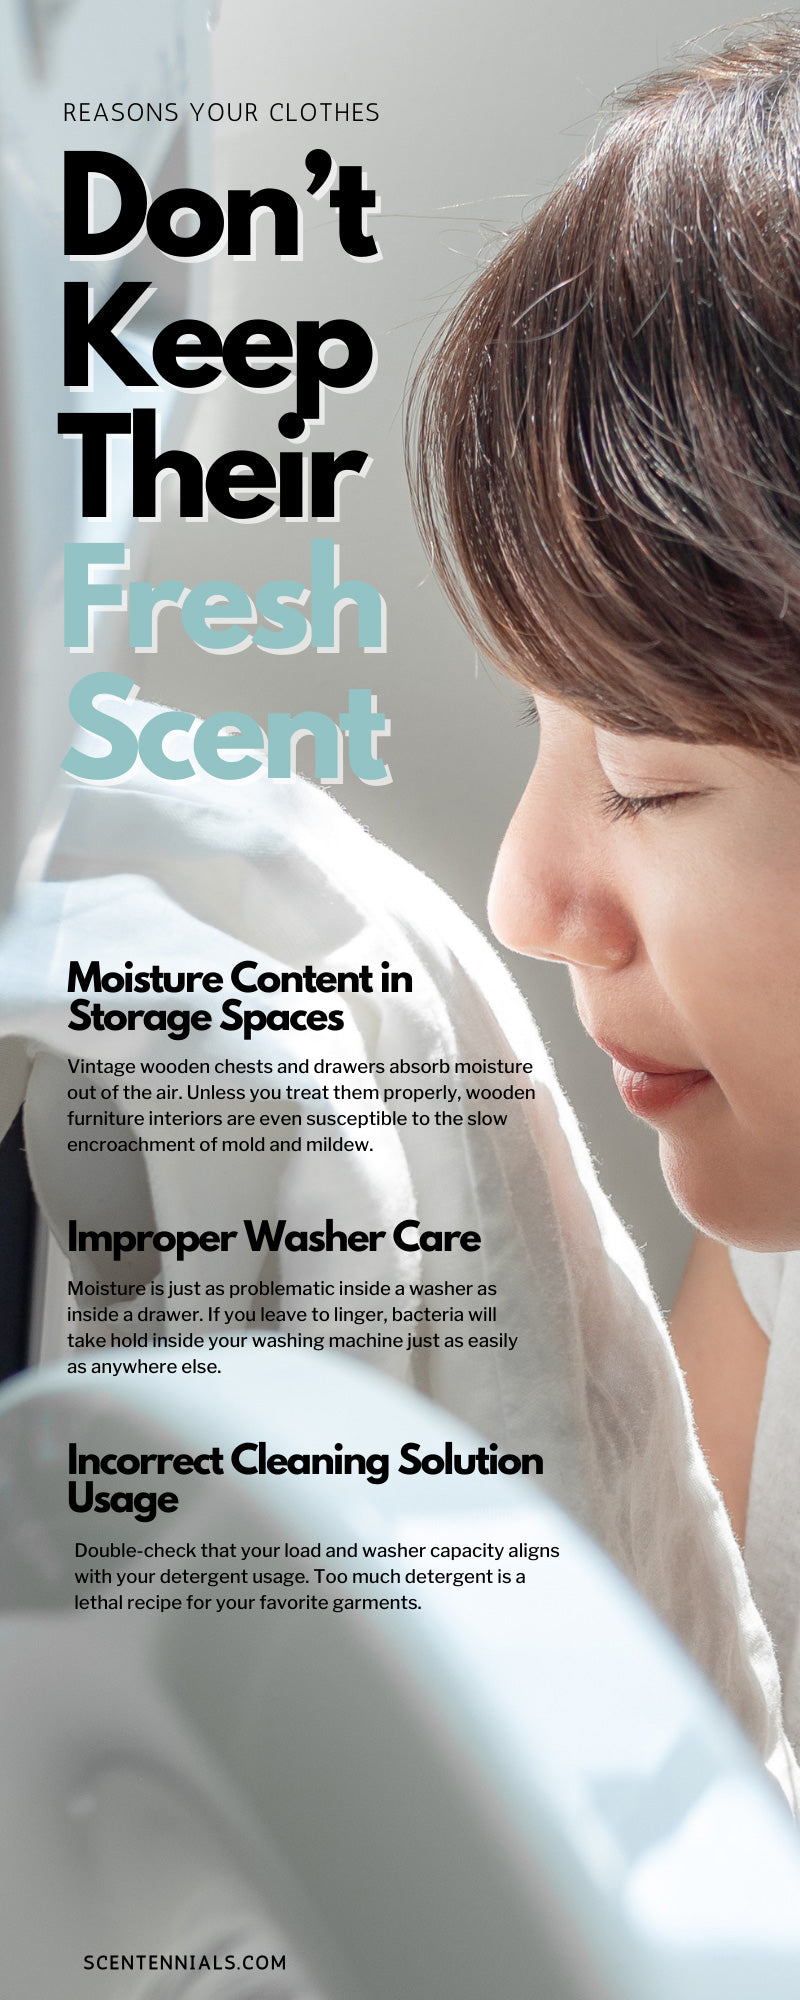 Reasons Your Clothes Don’t Keep Their Fresh Scent